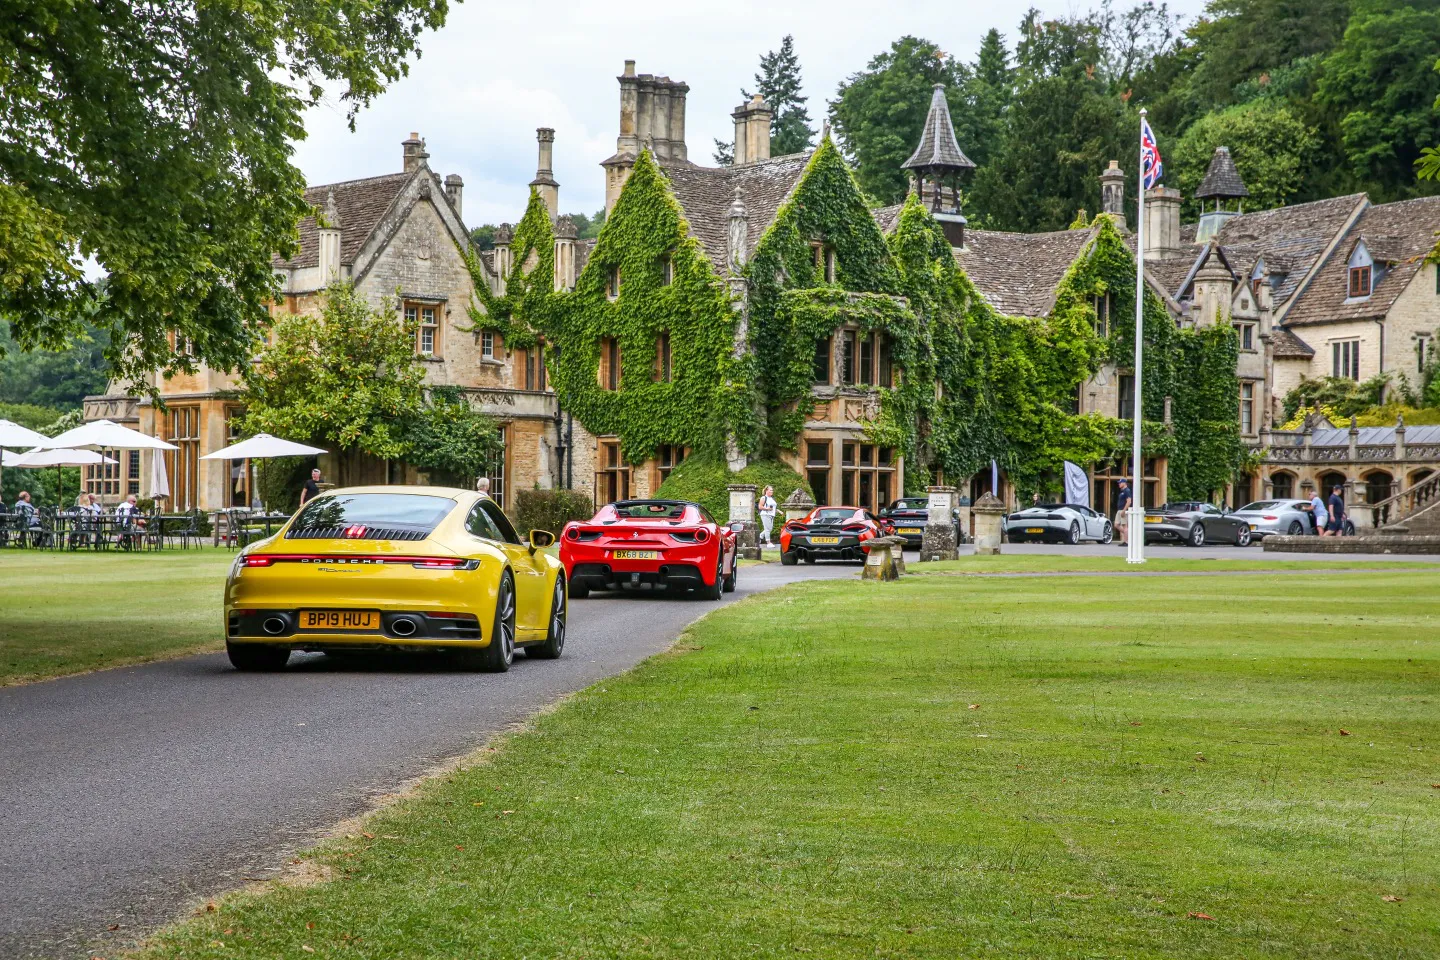 Drive your own car or rent a supercar for a luxury UK driving tour